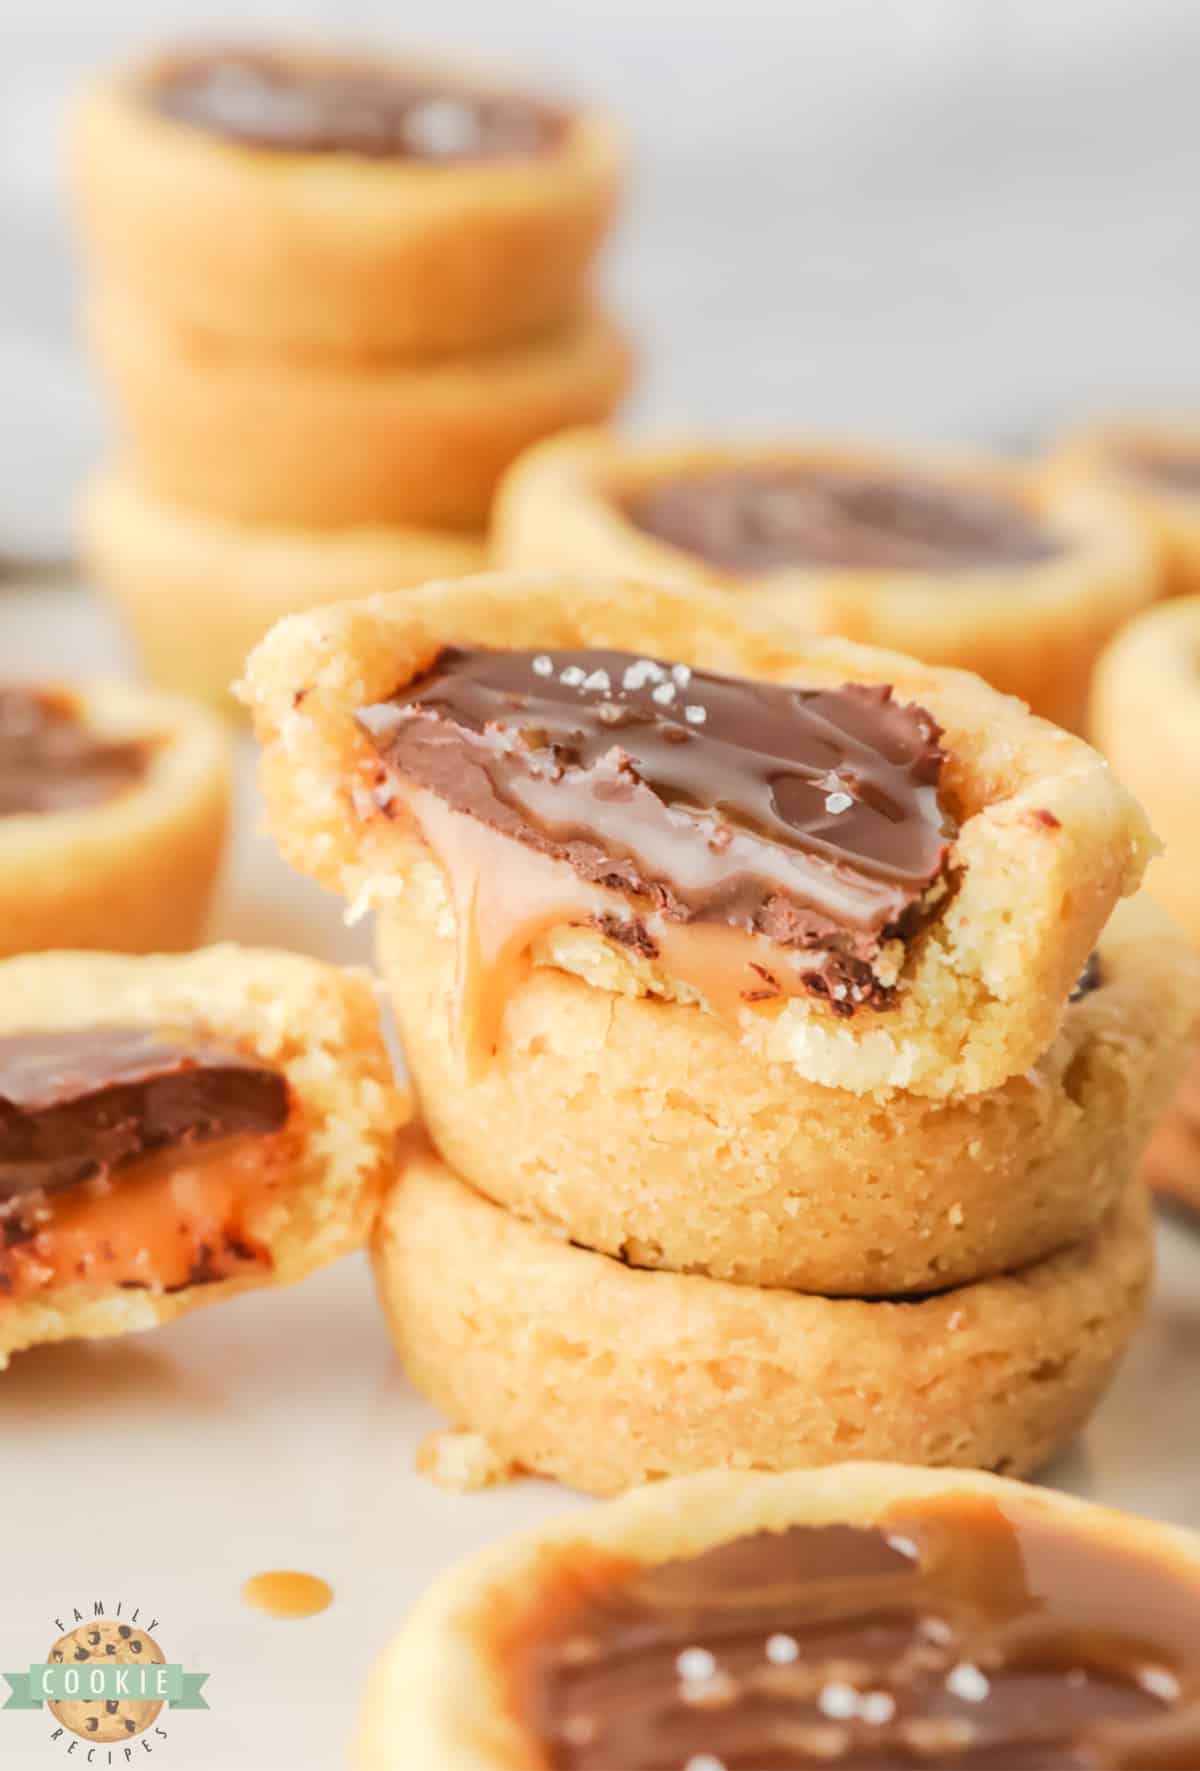 Twix Cookie Cups are so easy to make with pre-made cookie dough, caramels and chocolate chips! Only a few ingredients needed to make these delicious chocolate caramel cookie cups.